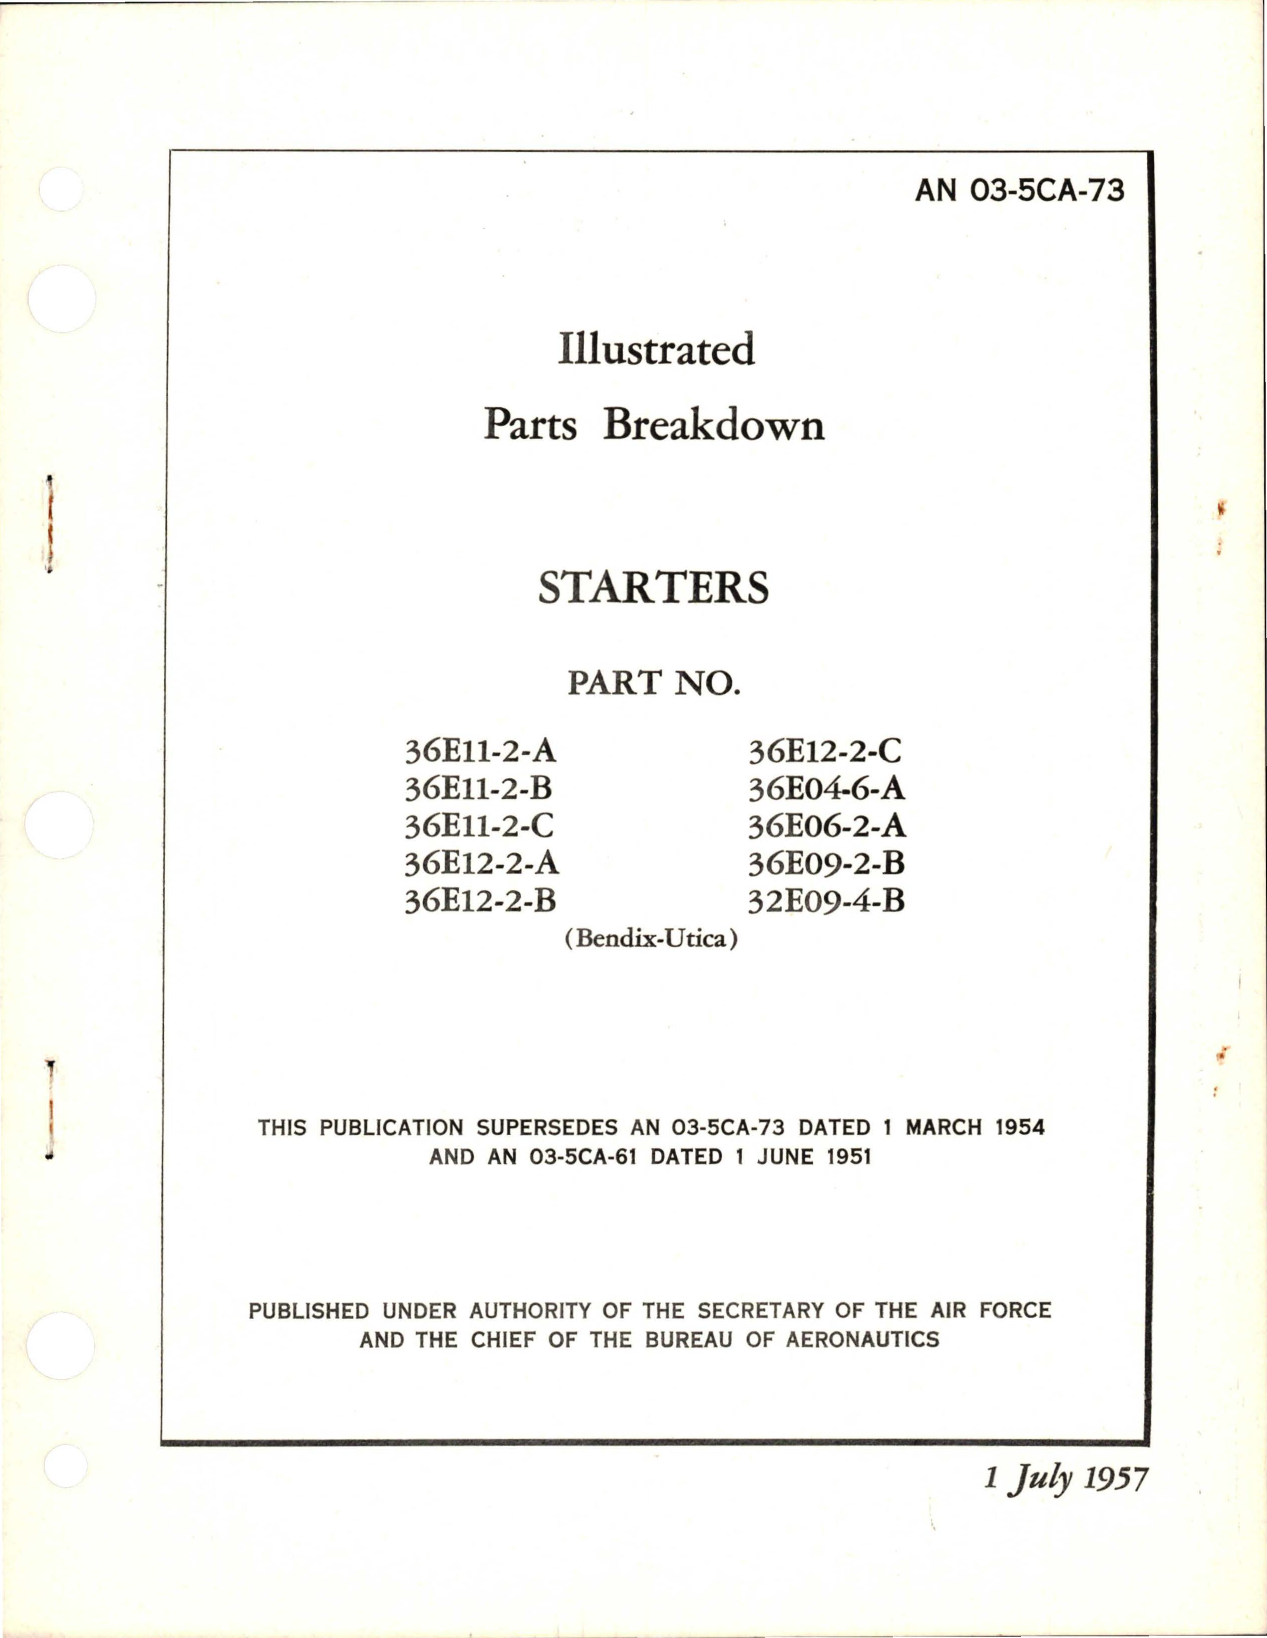 Sample page 1 from AirCorps Library document: Illustrated Parts Breakdown for Starters